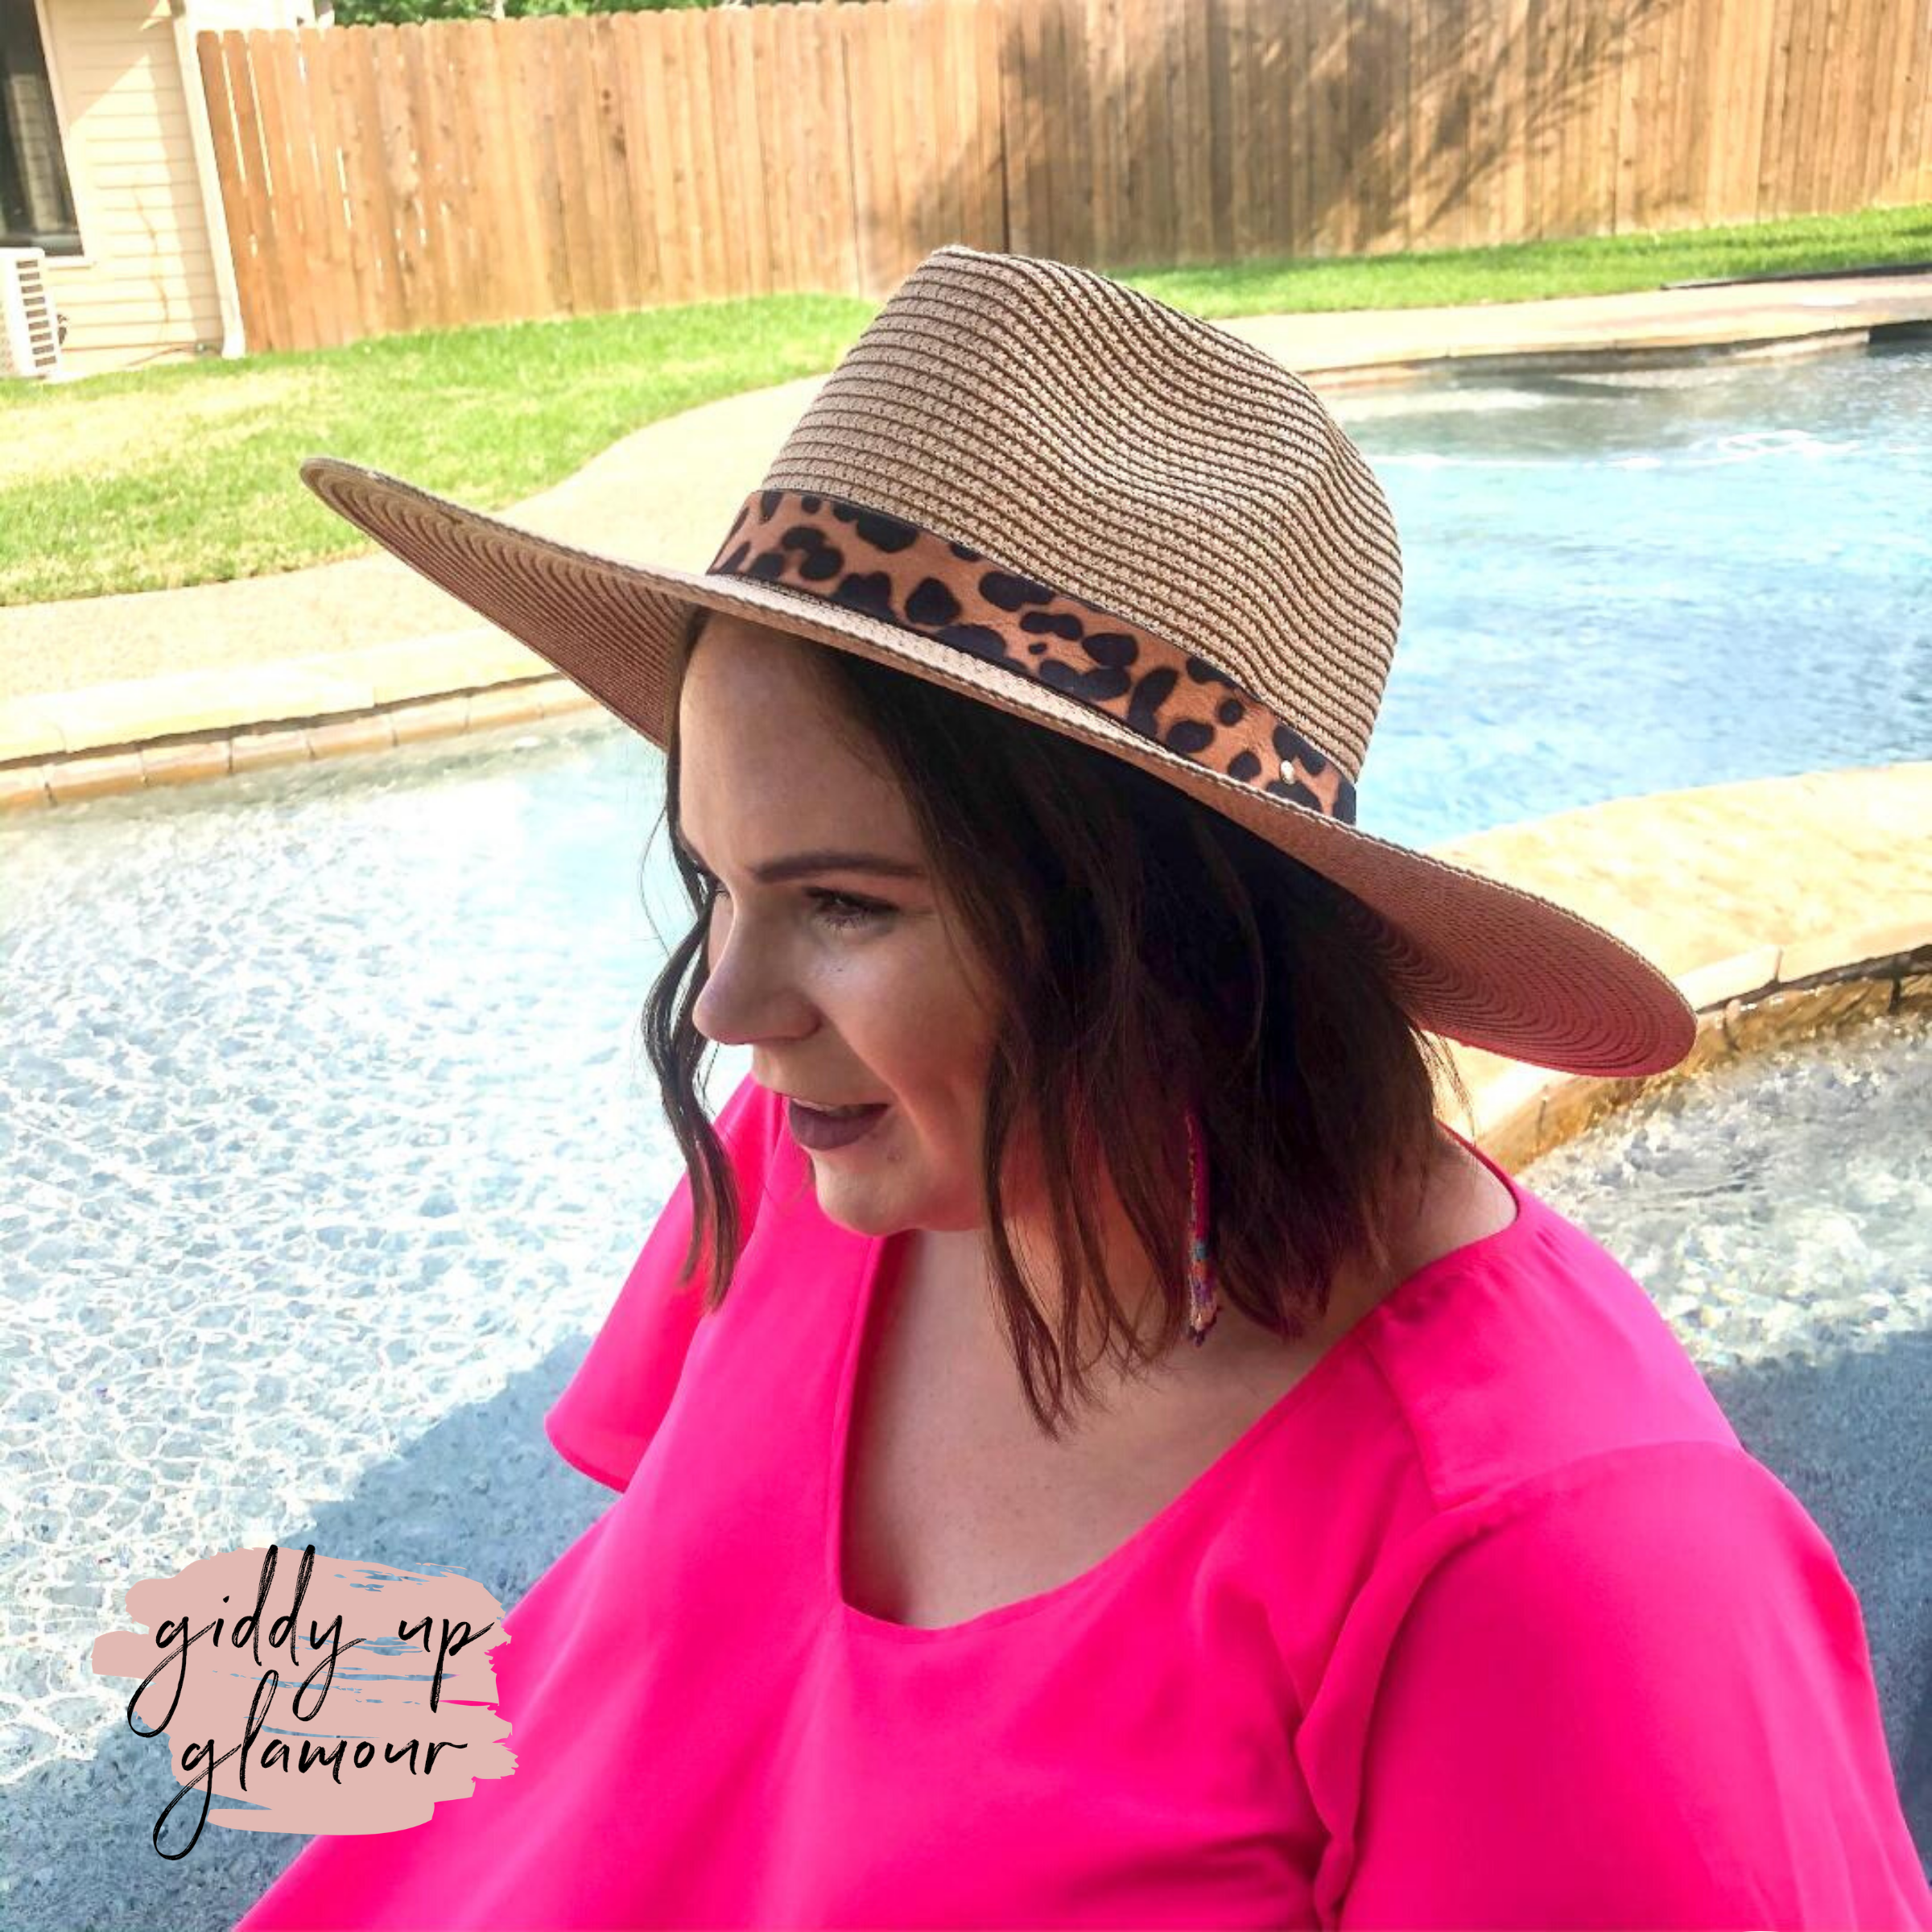 Big Bright Skies Straw Floppy Hat with Leopard Band in Tan - Giddy Up Glamour Boutique